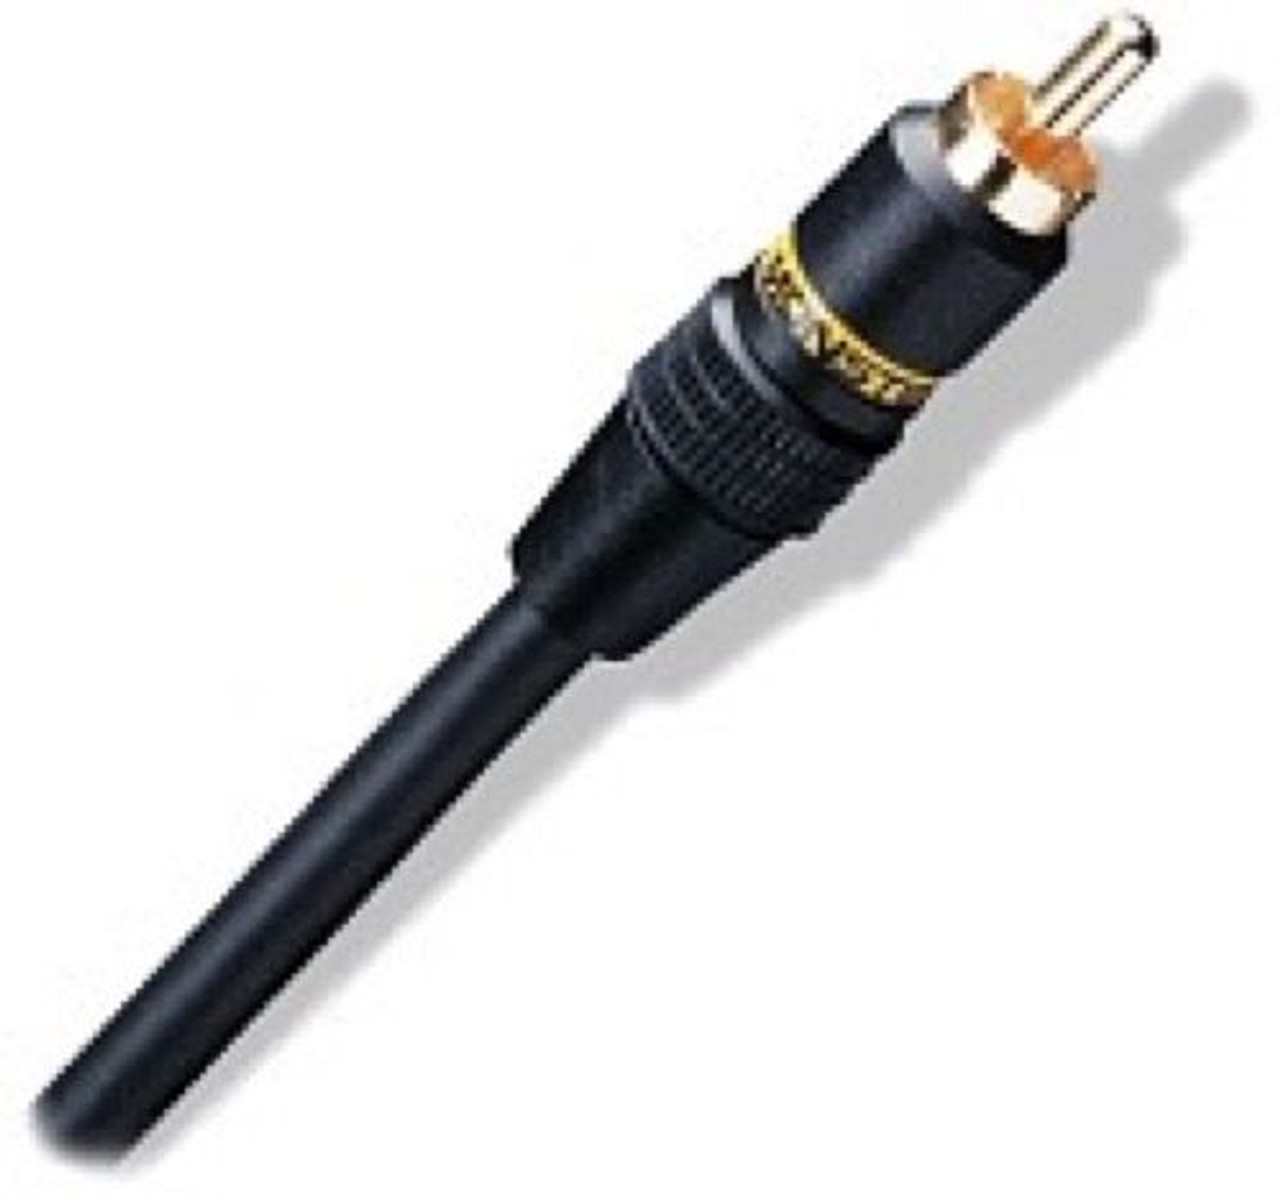 Monster Cable Bi100-2M Standard Interlink 100 Audio Interconnect Cable Male RCA to Male RCA 6 FT Gold RCA Cable 2 Meter Cables with Molded Plug Connectors Double Shielded Digital Home Theater Original Component Wire